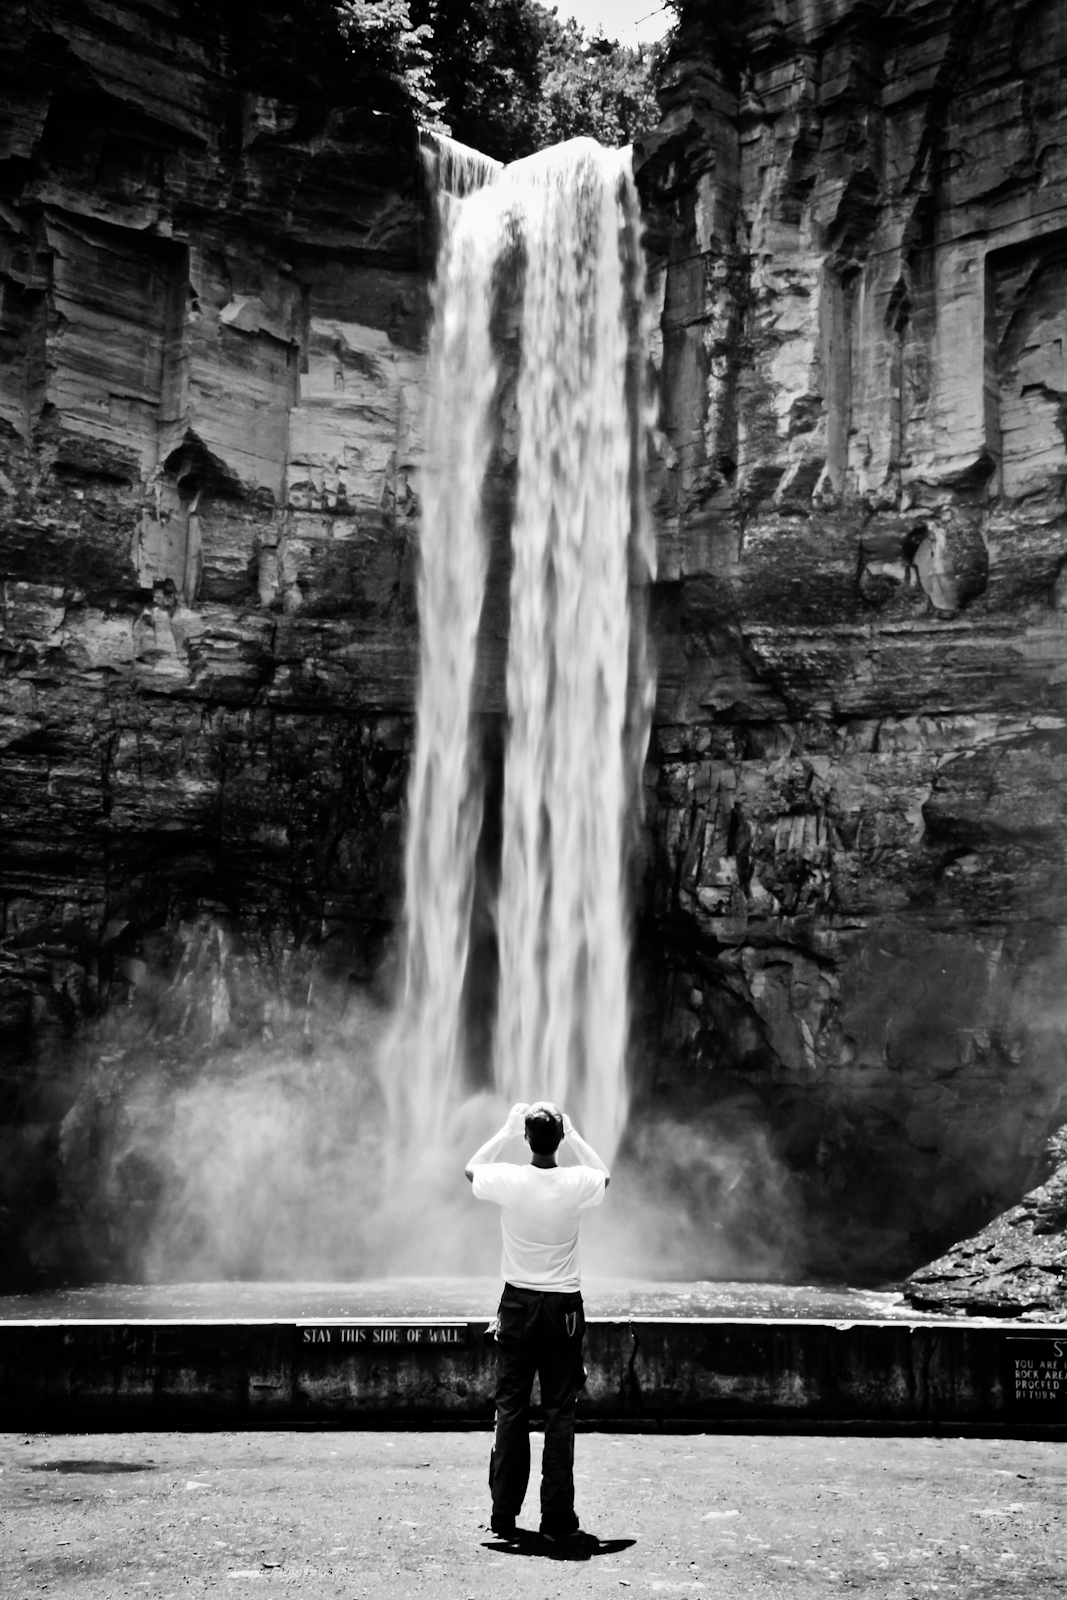 Under the Taughannock Falls